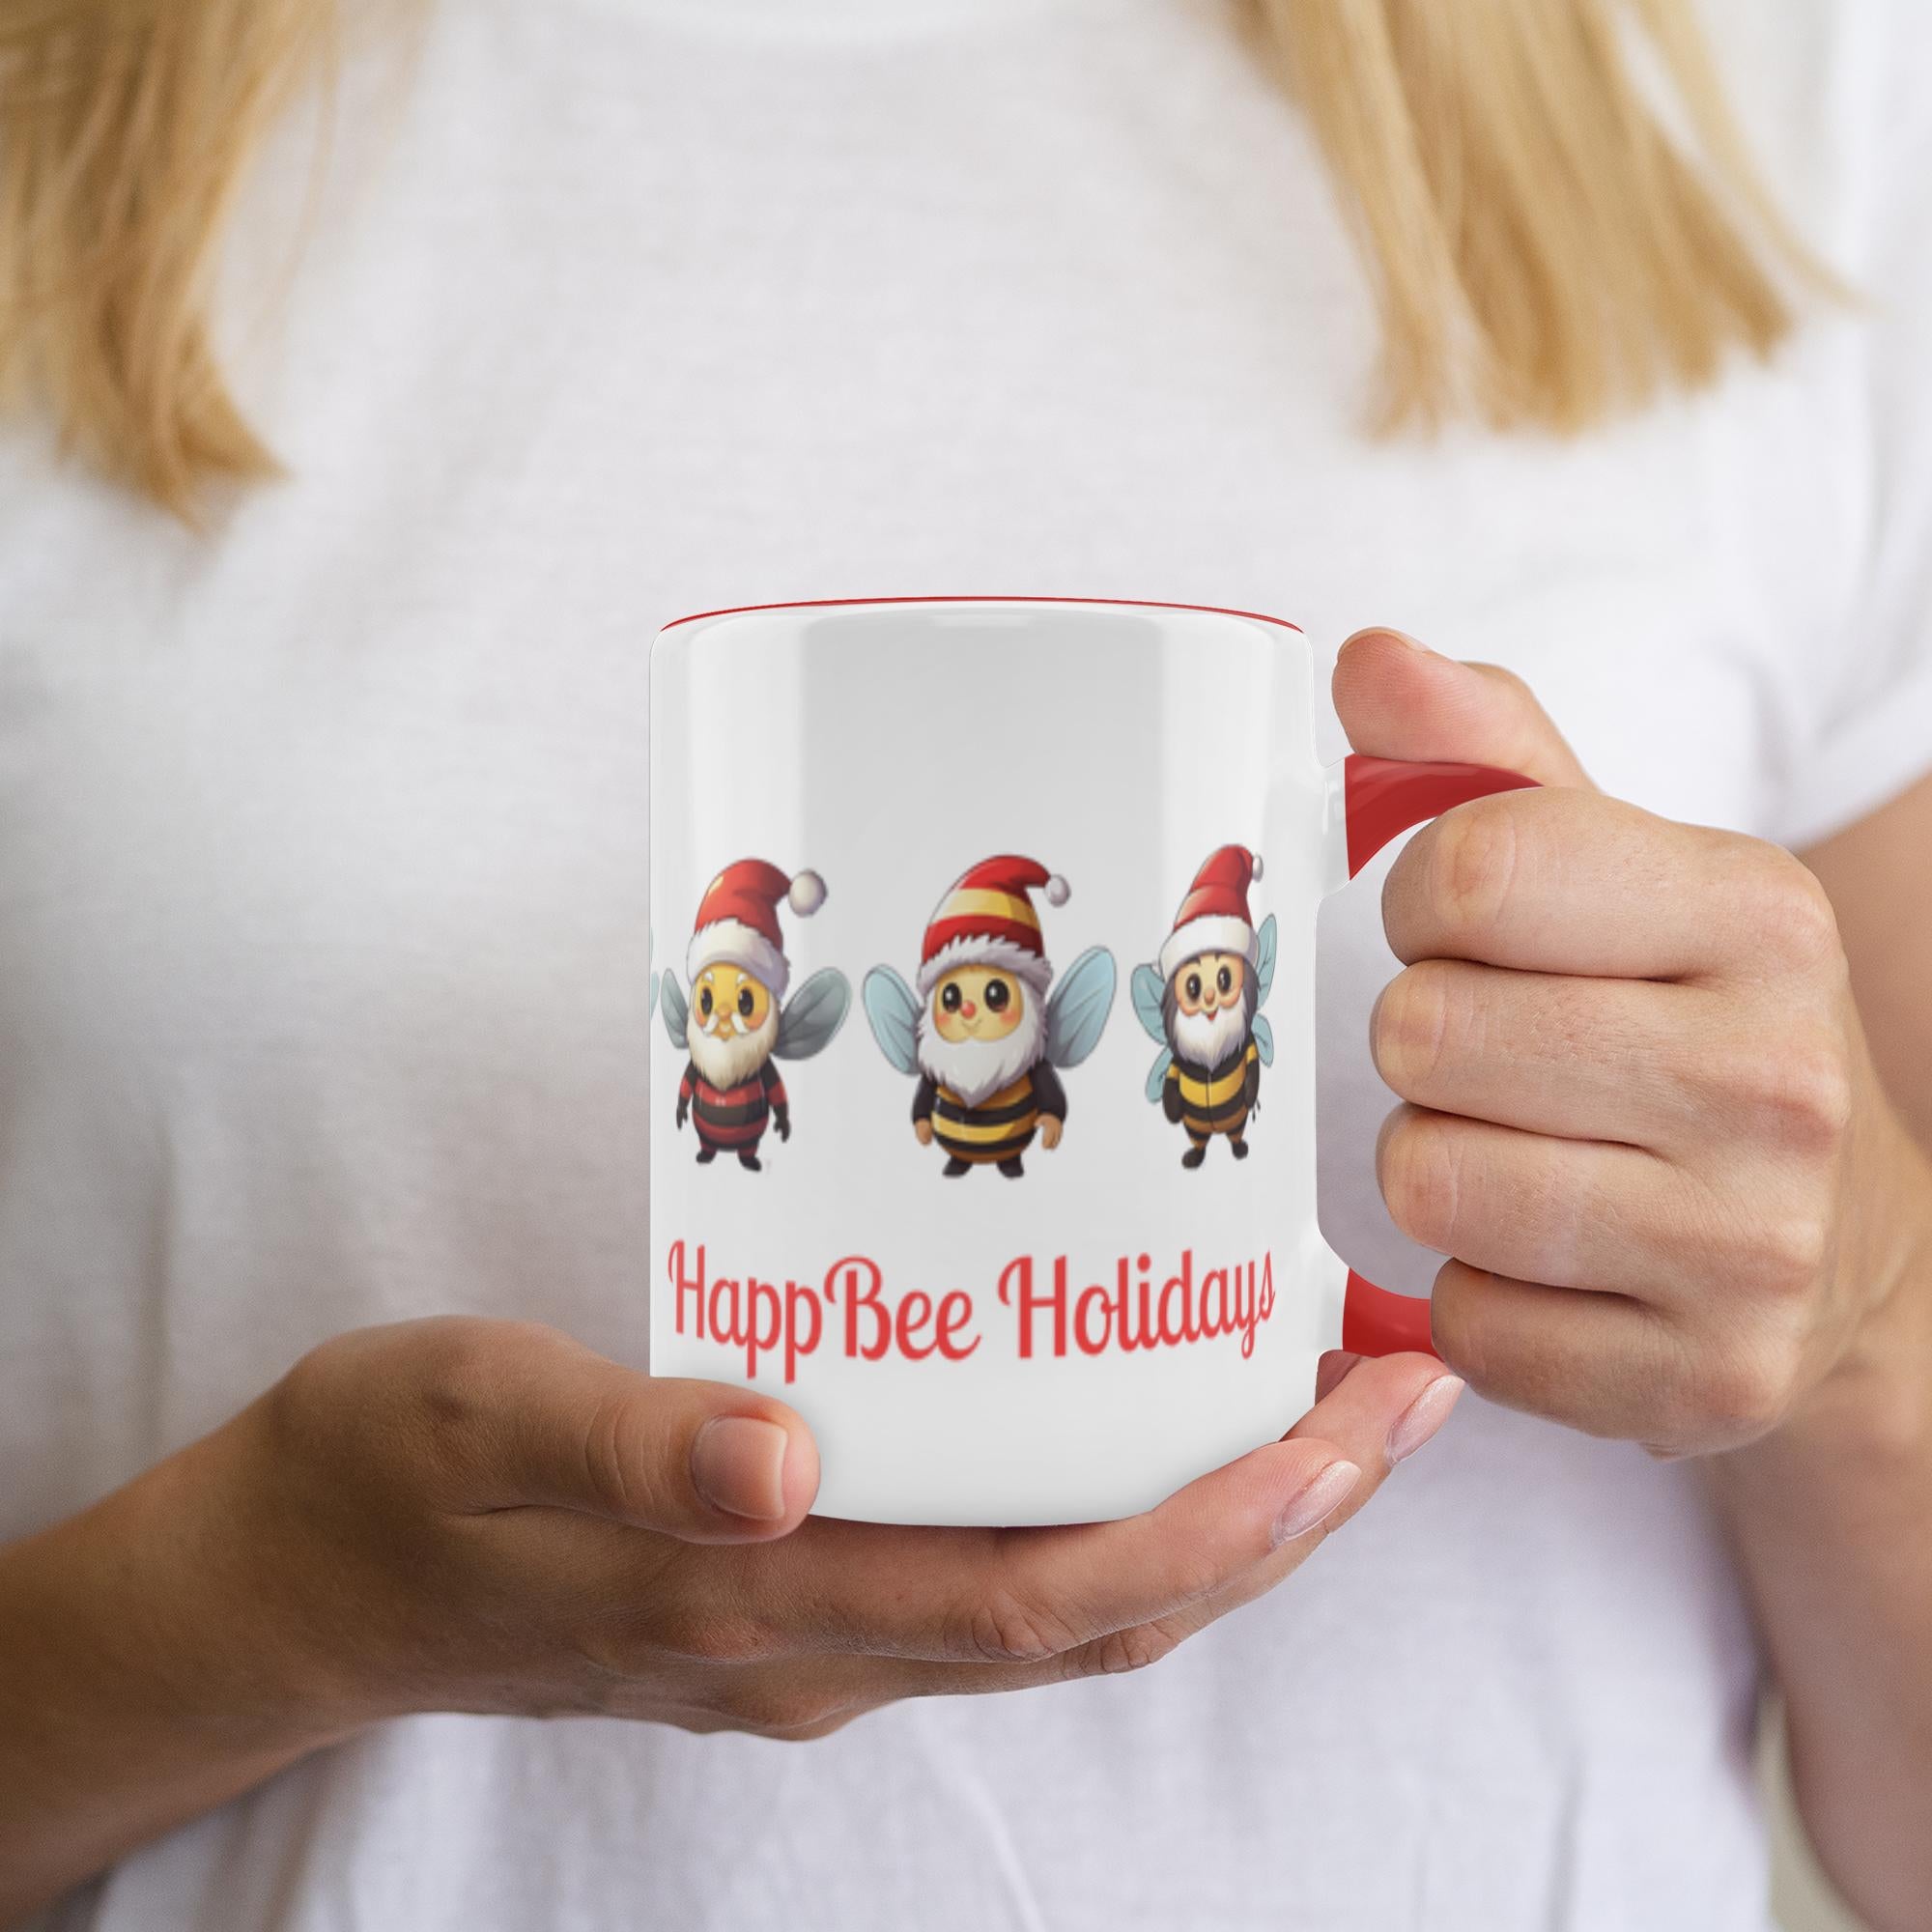 HappBee Holidays 11 oz. Accent Mug 11 oz White with Red Accents Coffee & Tea Cups gifts holiday store